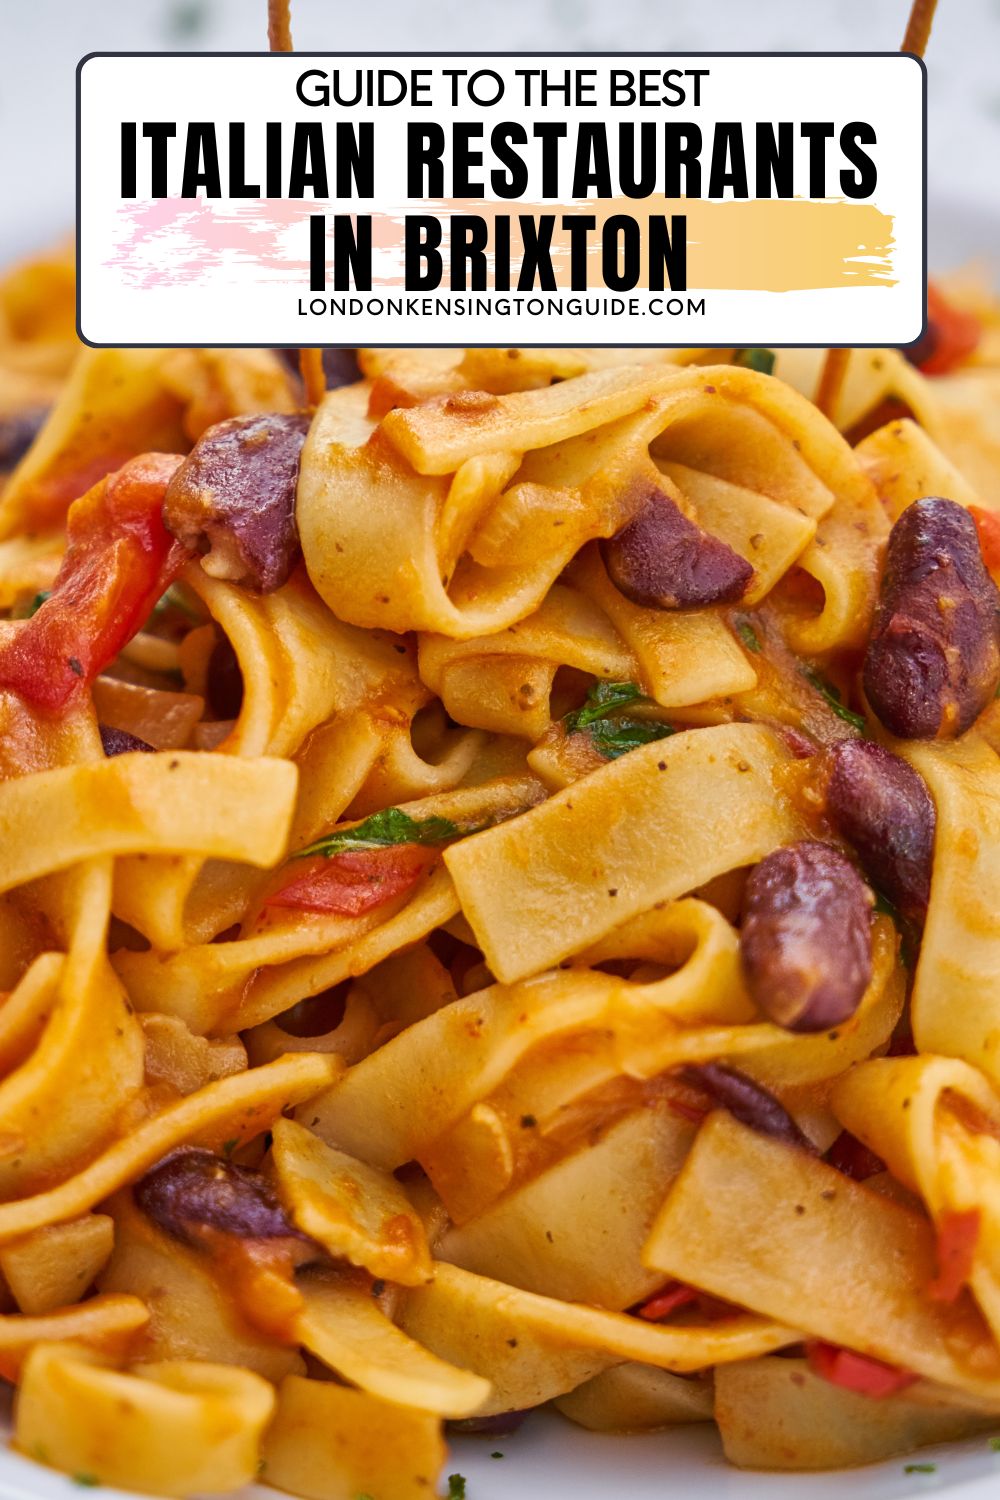 Guide to the best Italian restaurants in Brixton. Whether you are looking for a pasta place, Pizzeria or just want food Italian food. We have you covered! italian restaurants brixton | la nonna brixton | franzina trattoria brixton | pasta restaurant brixton | italian food brixton | italian restaurants in brixton | nice restaurants in brixton | restaurants near brixton | italian brixton